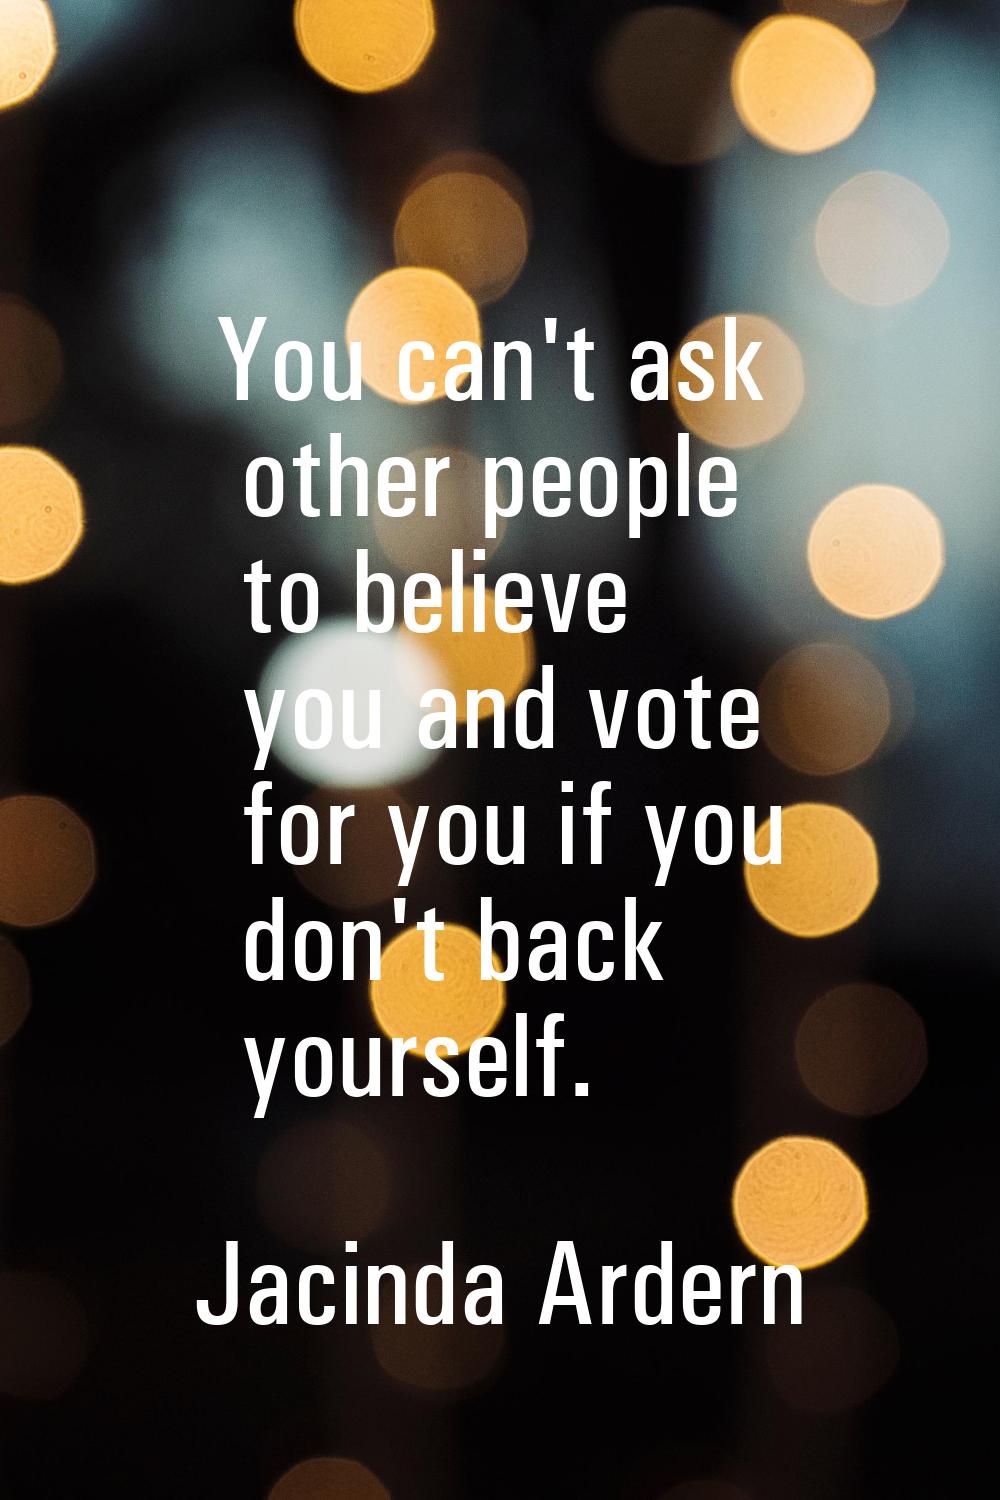 You can't ask other people to believe you and vote for you if you don't back yourself.